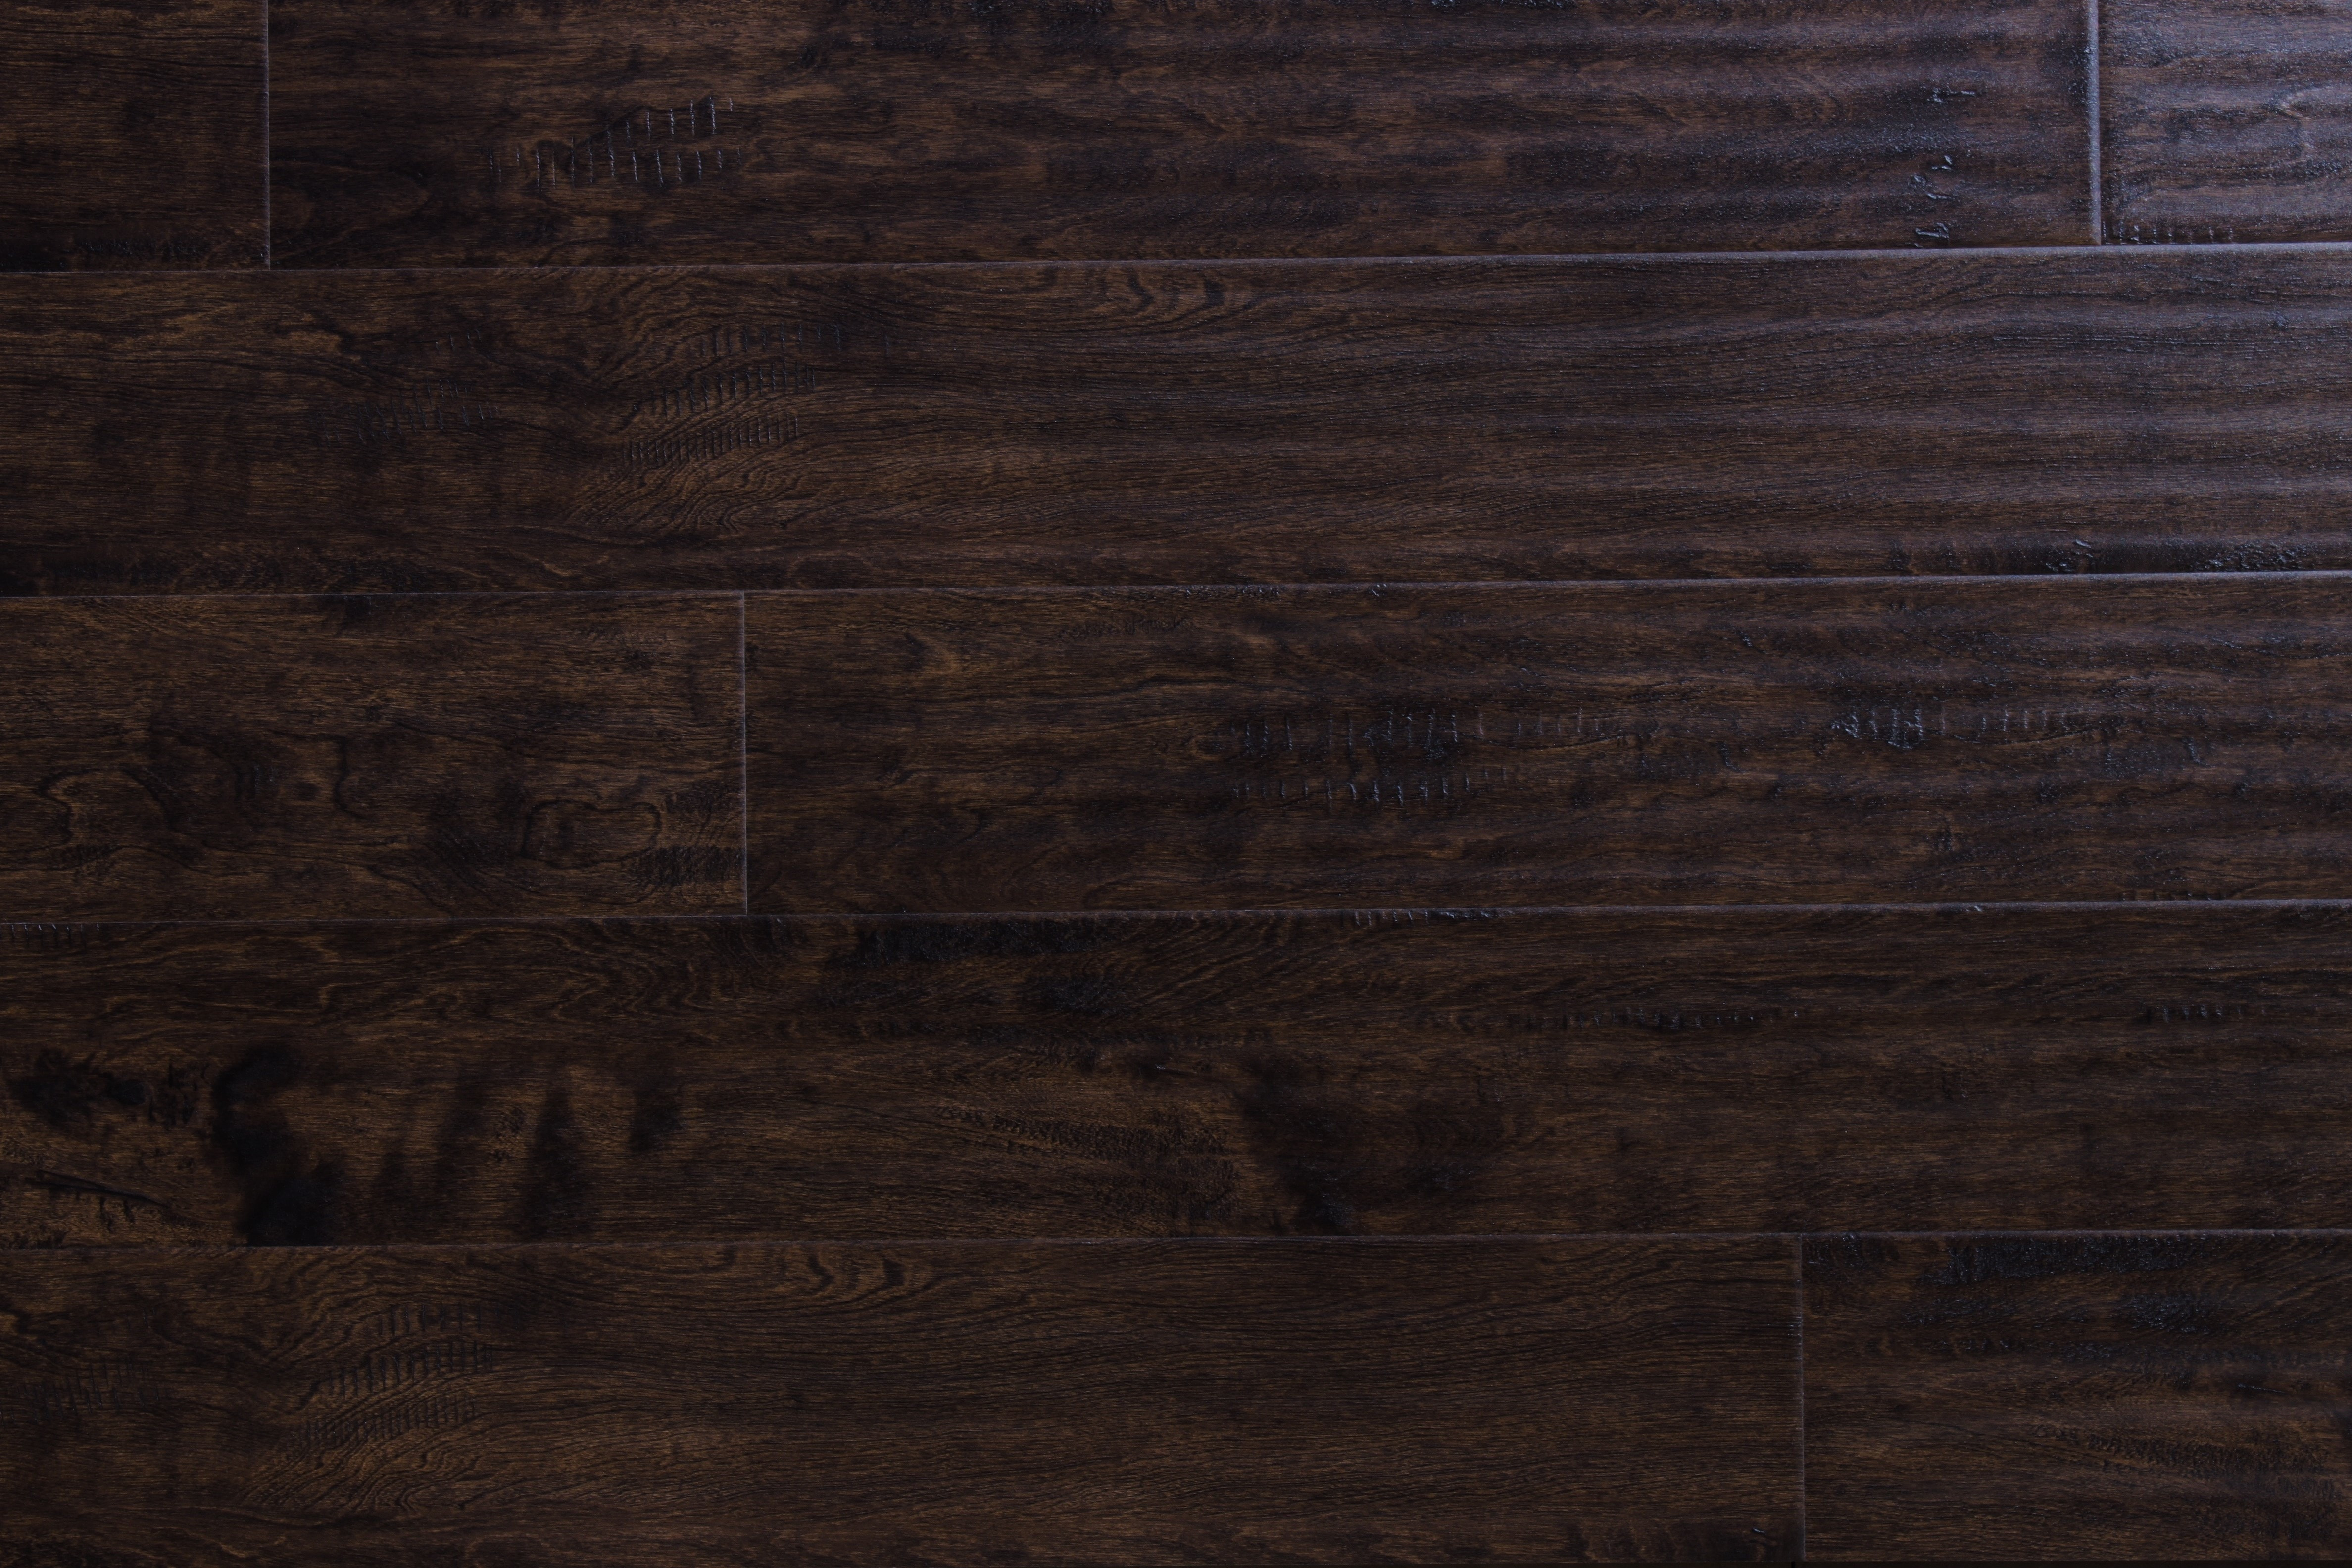 26 attractive Pg Model Hardwood Flooring Reviews 2024 free download pg model hardwood flooring reviews of wood flooring free samples available at builddirecta for tailor multi gb 5874277bb8d3c